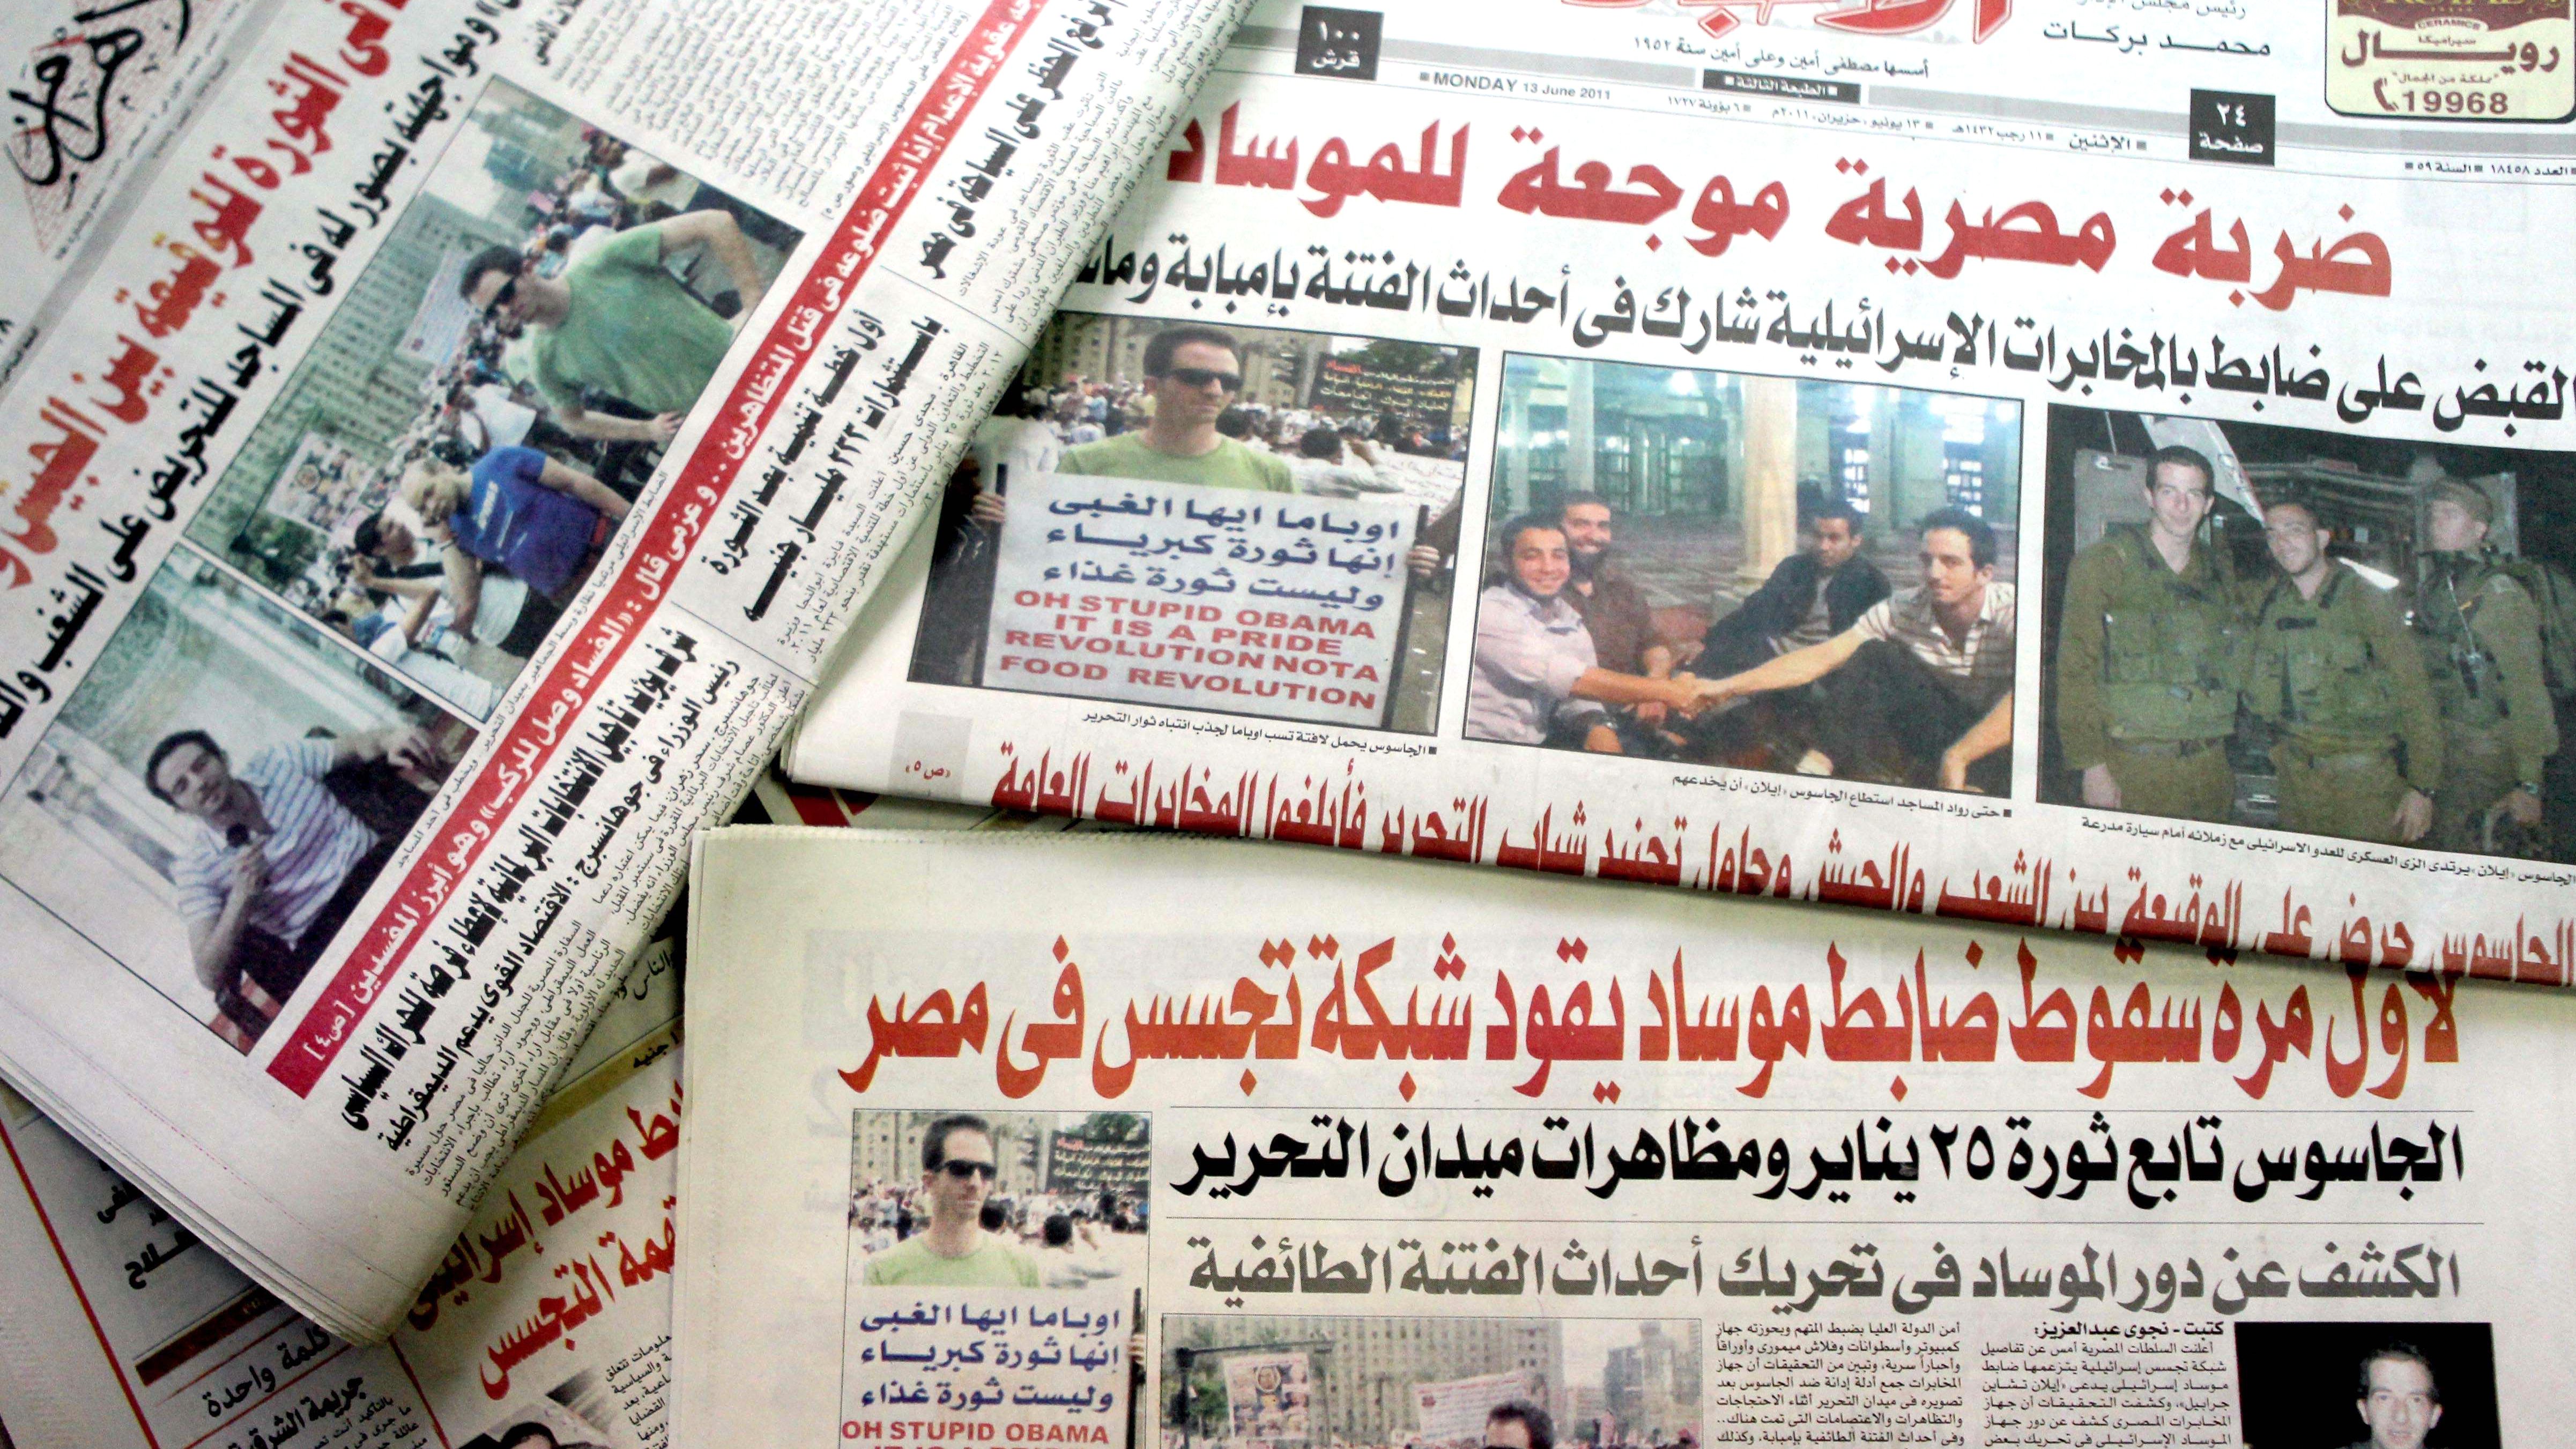 Ilan Grapel, a U.S.-Israeli citizen arrested June 12 on suspicion of spying, is pictured on Egyptian newspapers dated June 13.